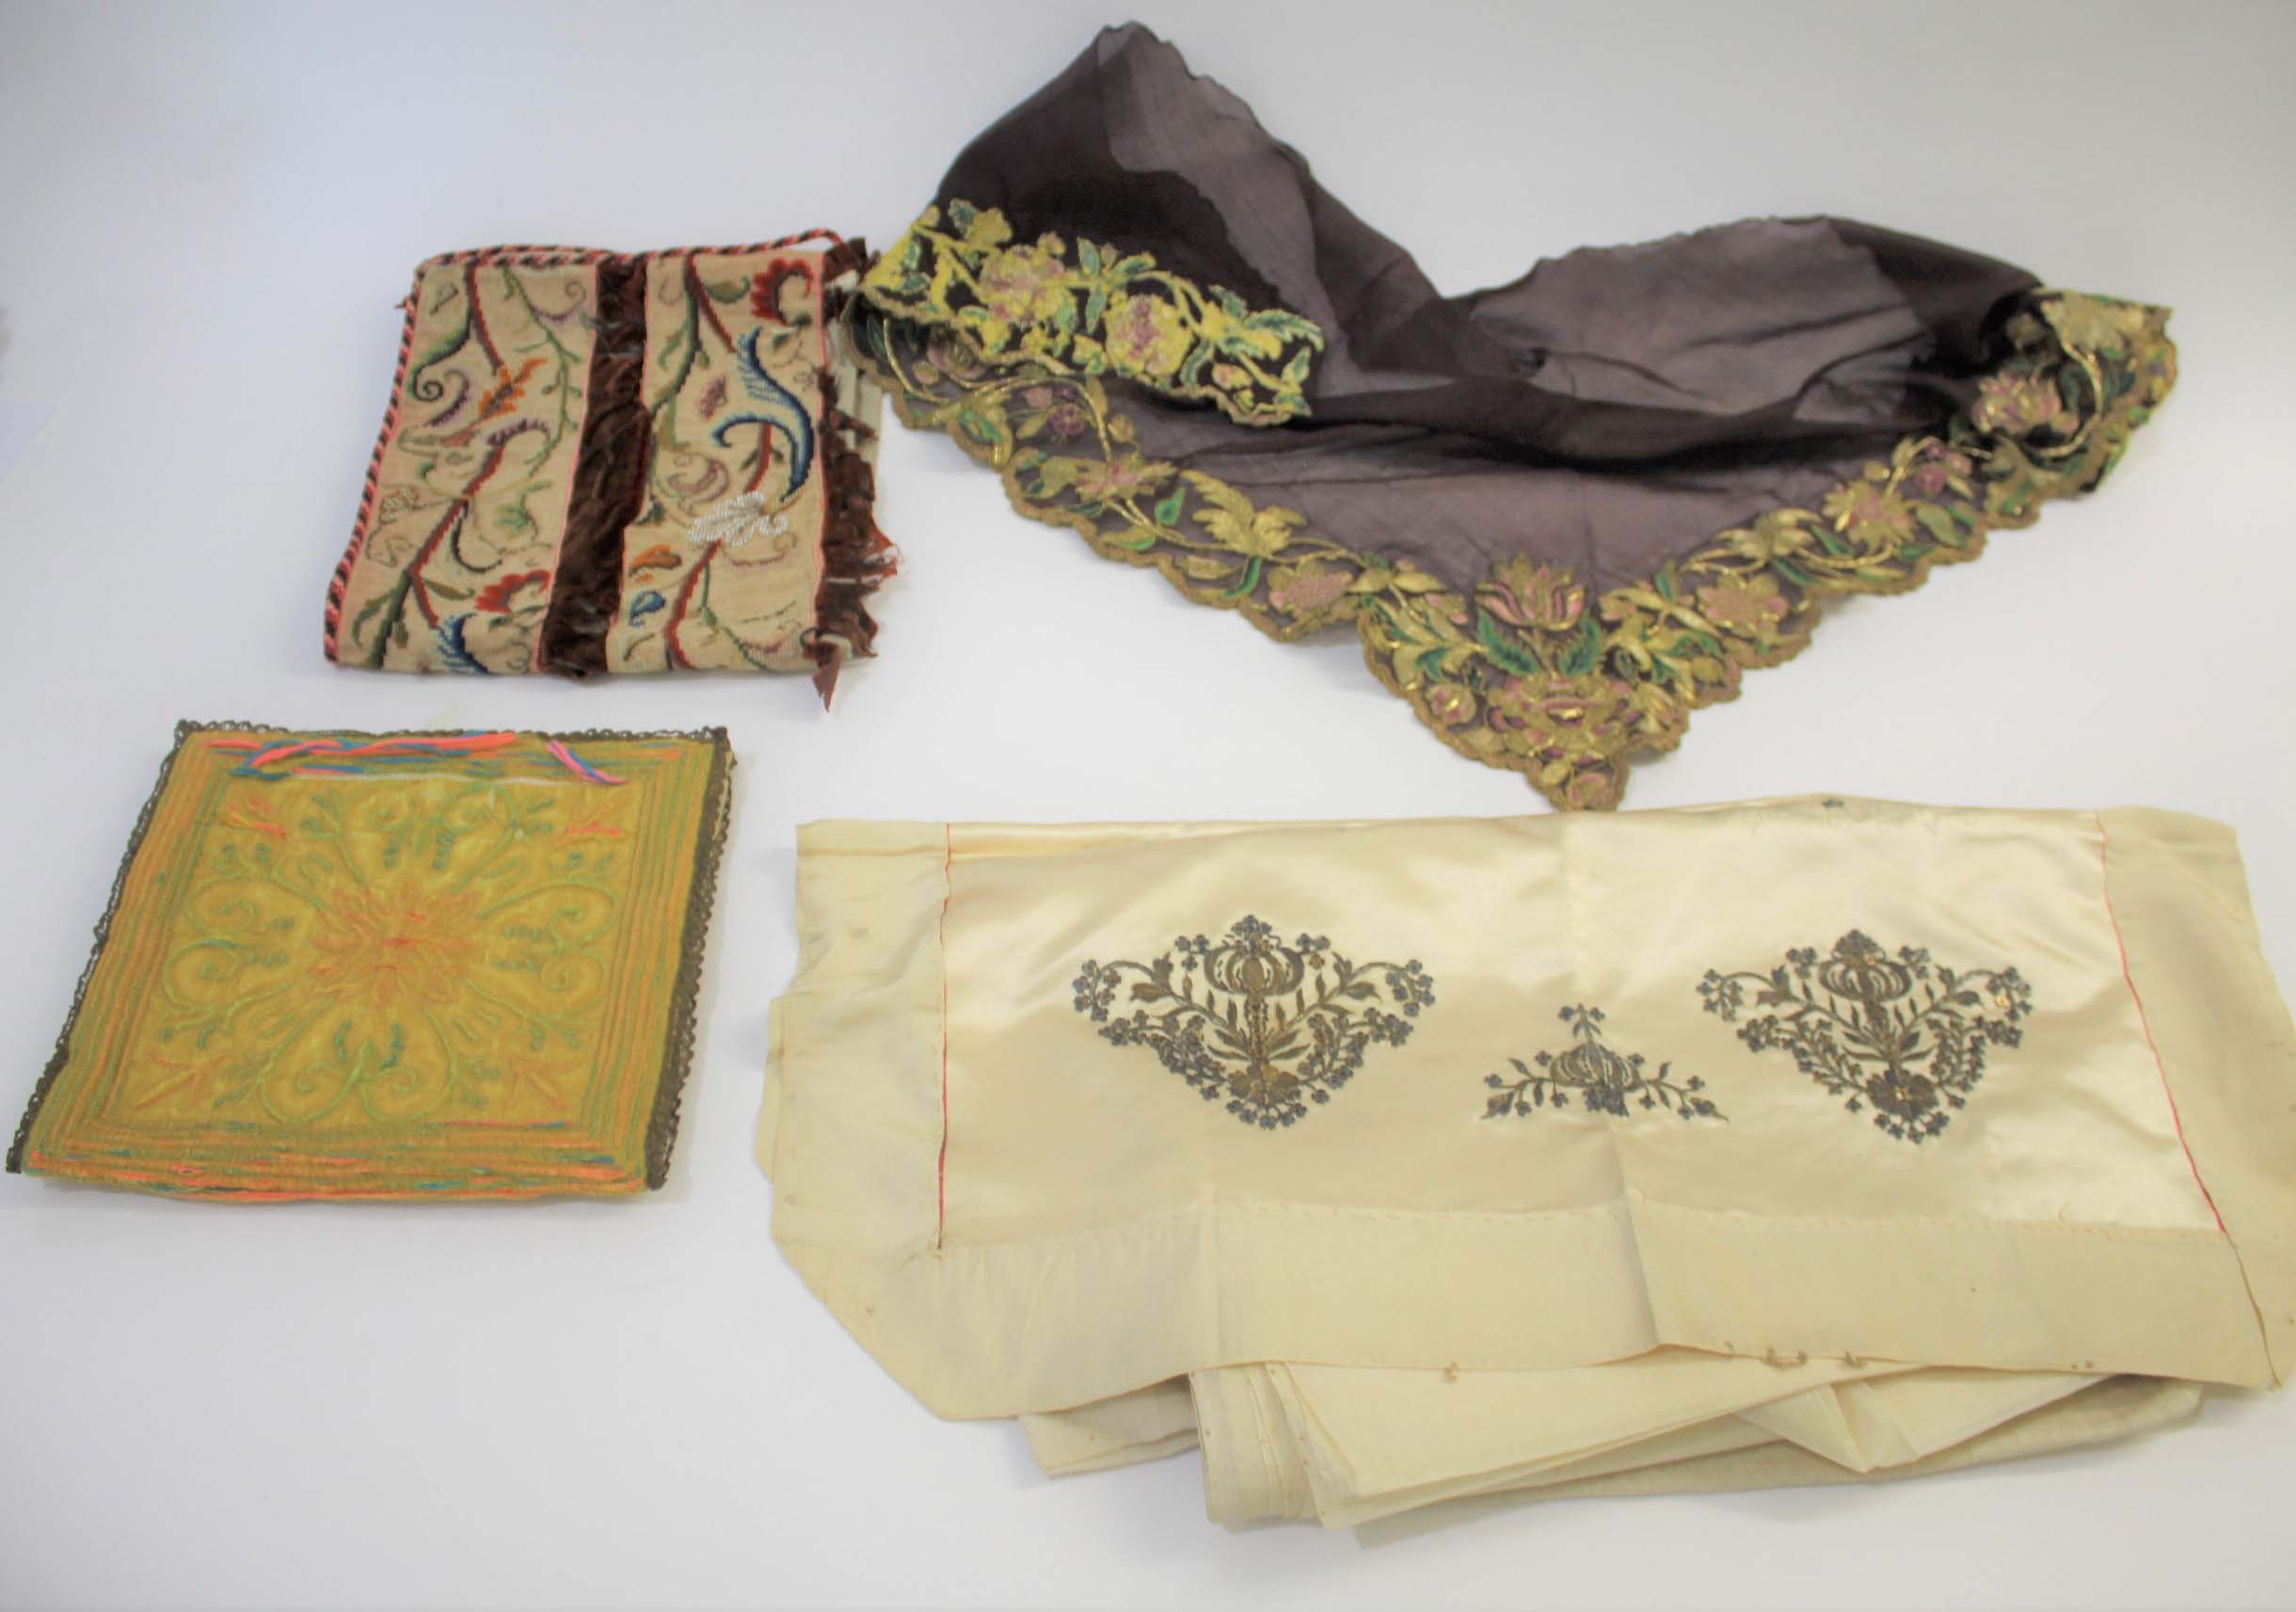 EARLY TEXTILES including a 19thc wool and bead cross stitch cushion cover, a fine brown silk